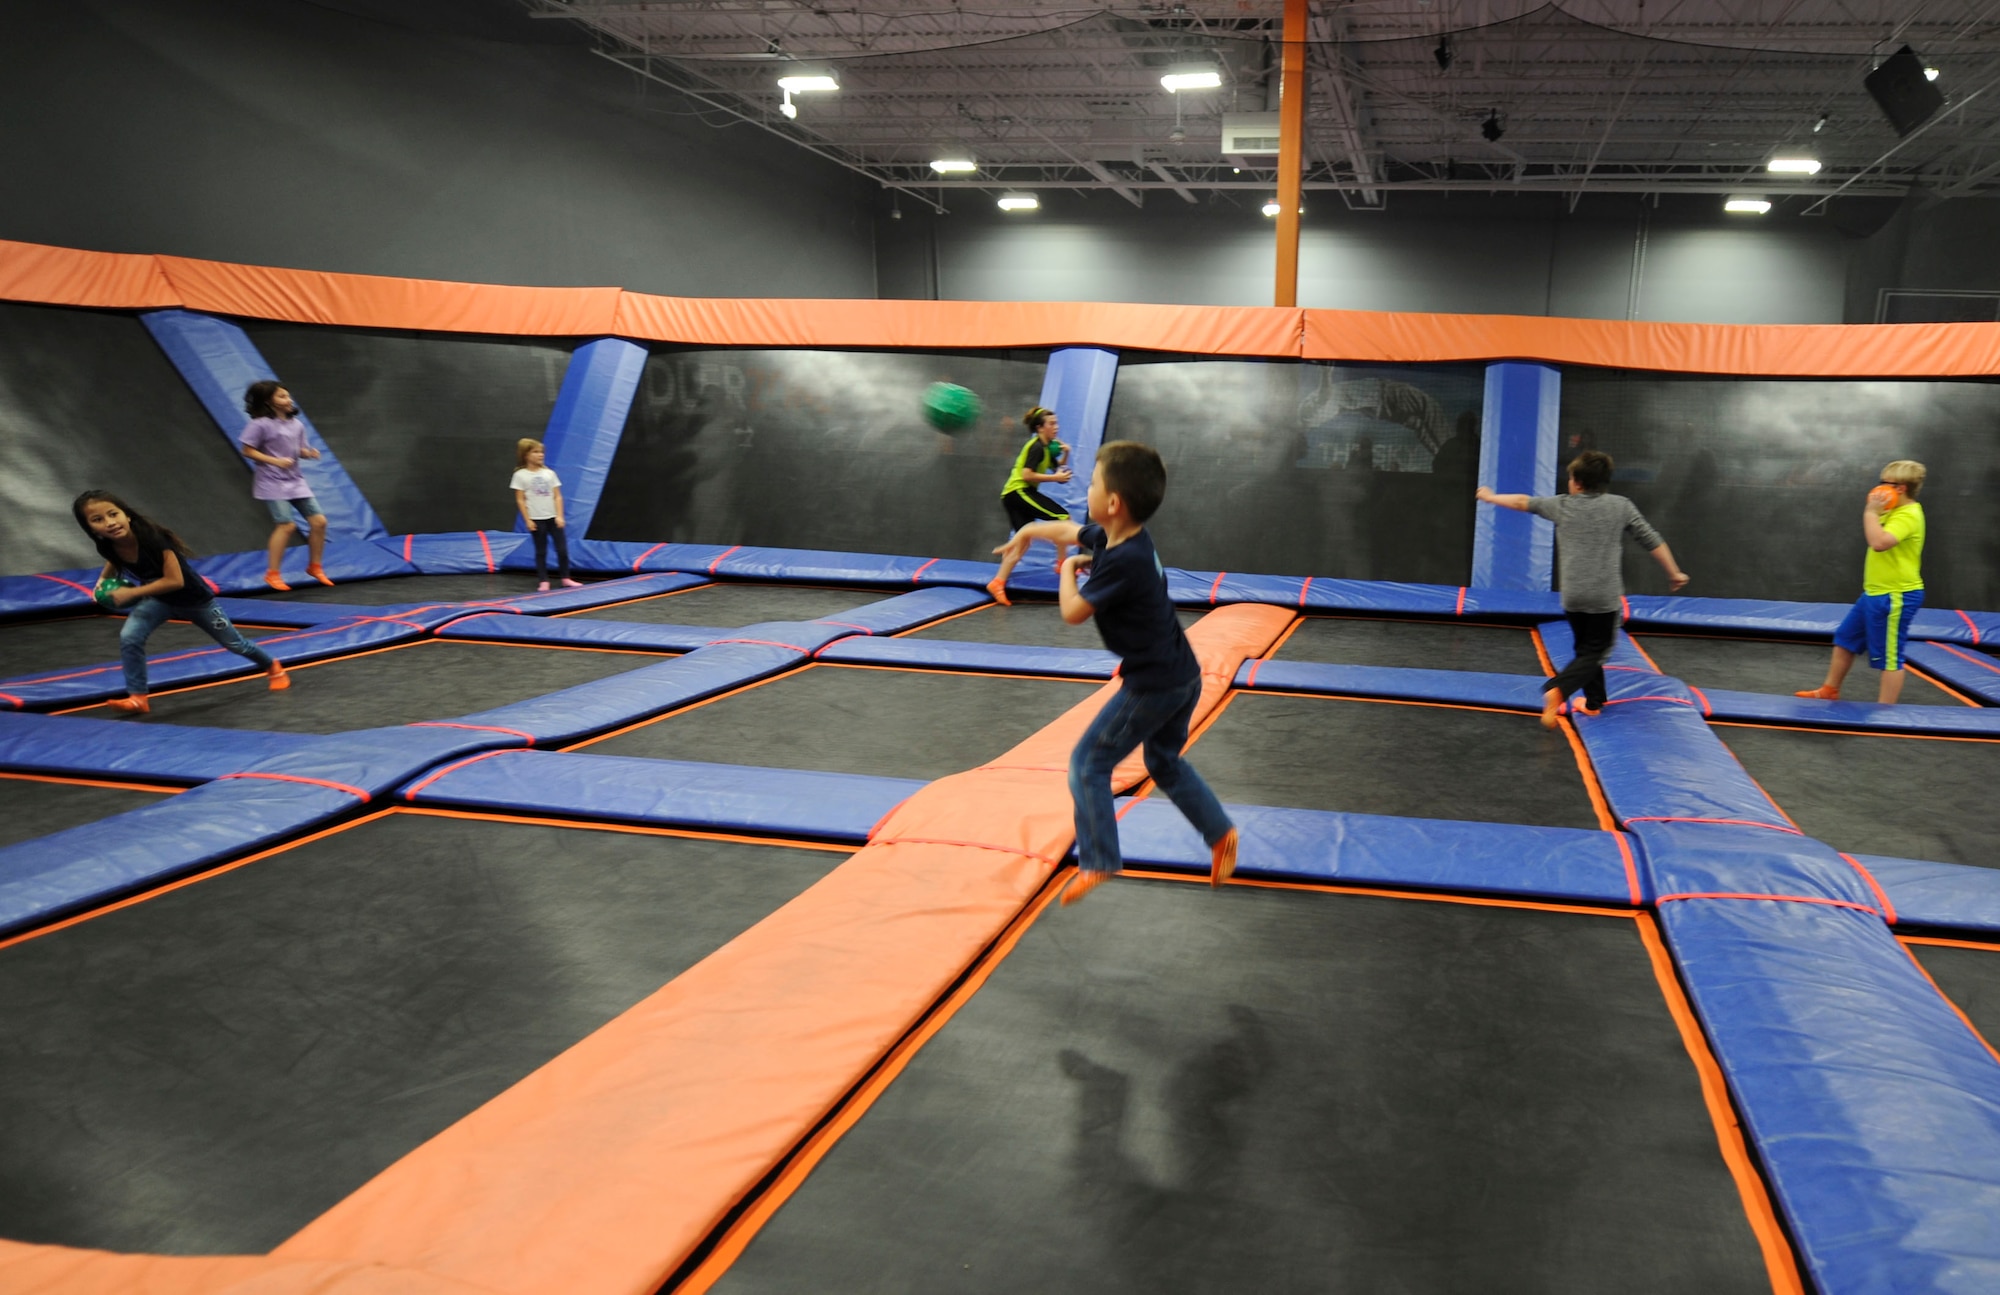 Families of deployed Air Commandos enjoy a Hearts Apart event at the Sky Zone in Pensacola, Fla., Jan. 28, 2017. Hearts Apart is an Airman and Family Readiness Center program for spouses of deployed Air Commandos to connect with other spouses and form support networks. (U.S. Air Force photo by Senior Airman Kasie P. Whitfield)